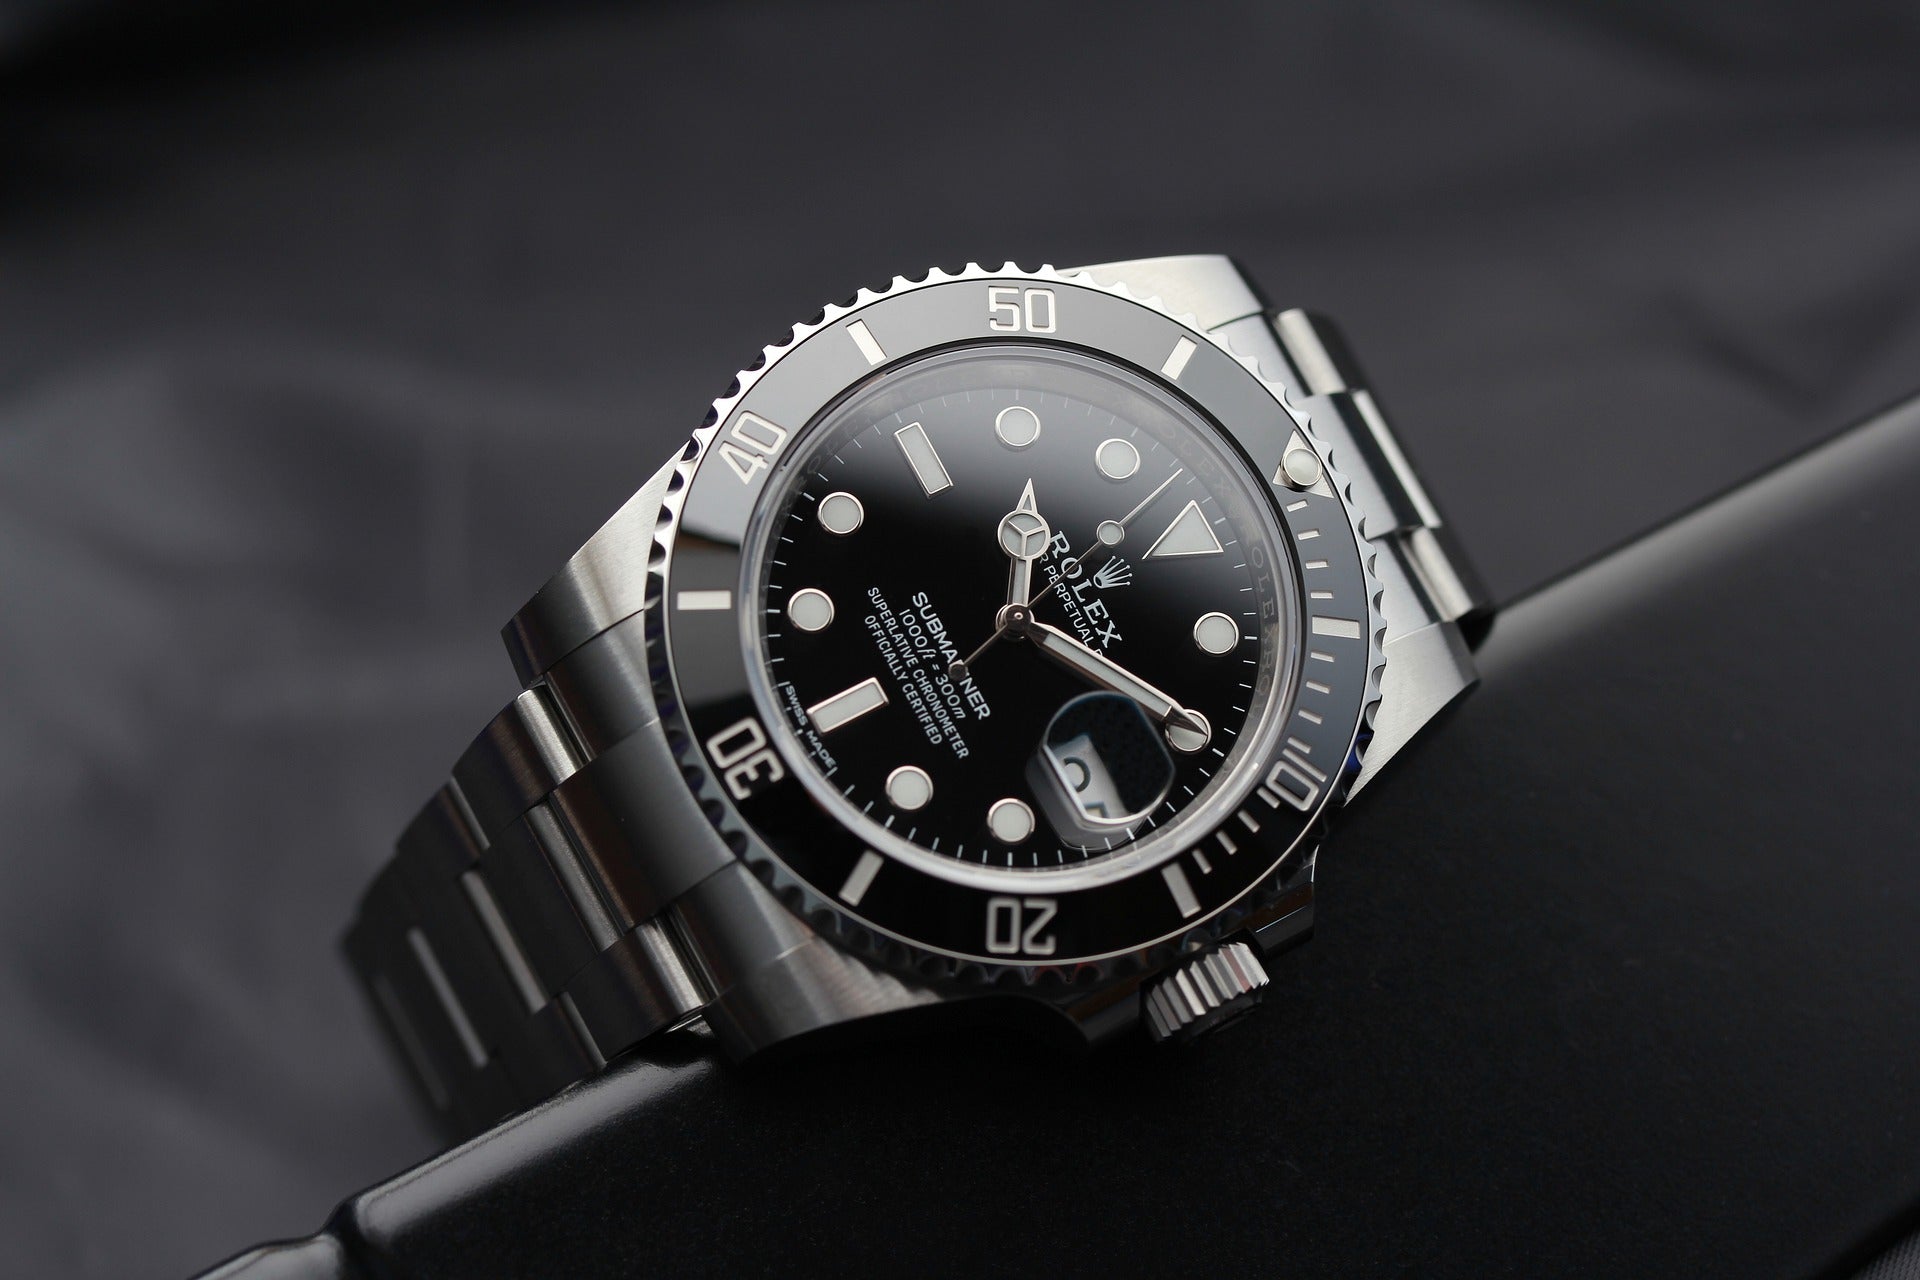 WHY ARE ROLEX WATCHES EXPENSIVE/ COSTLY?